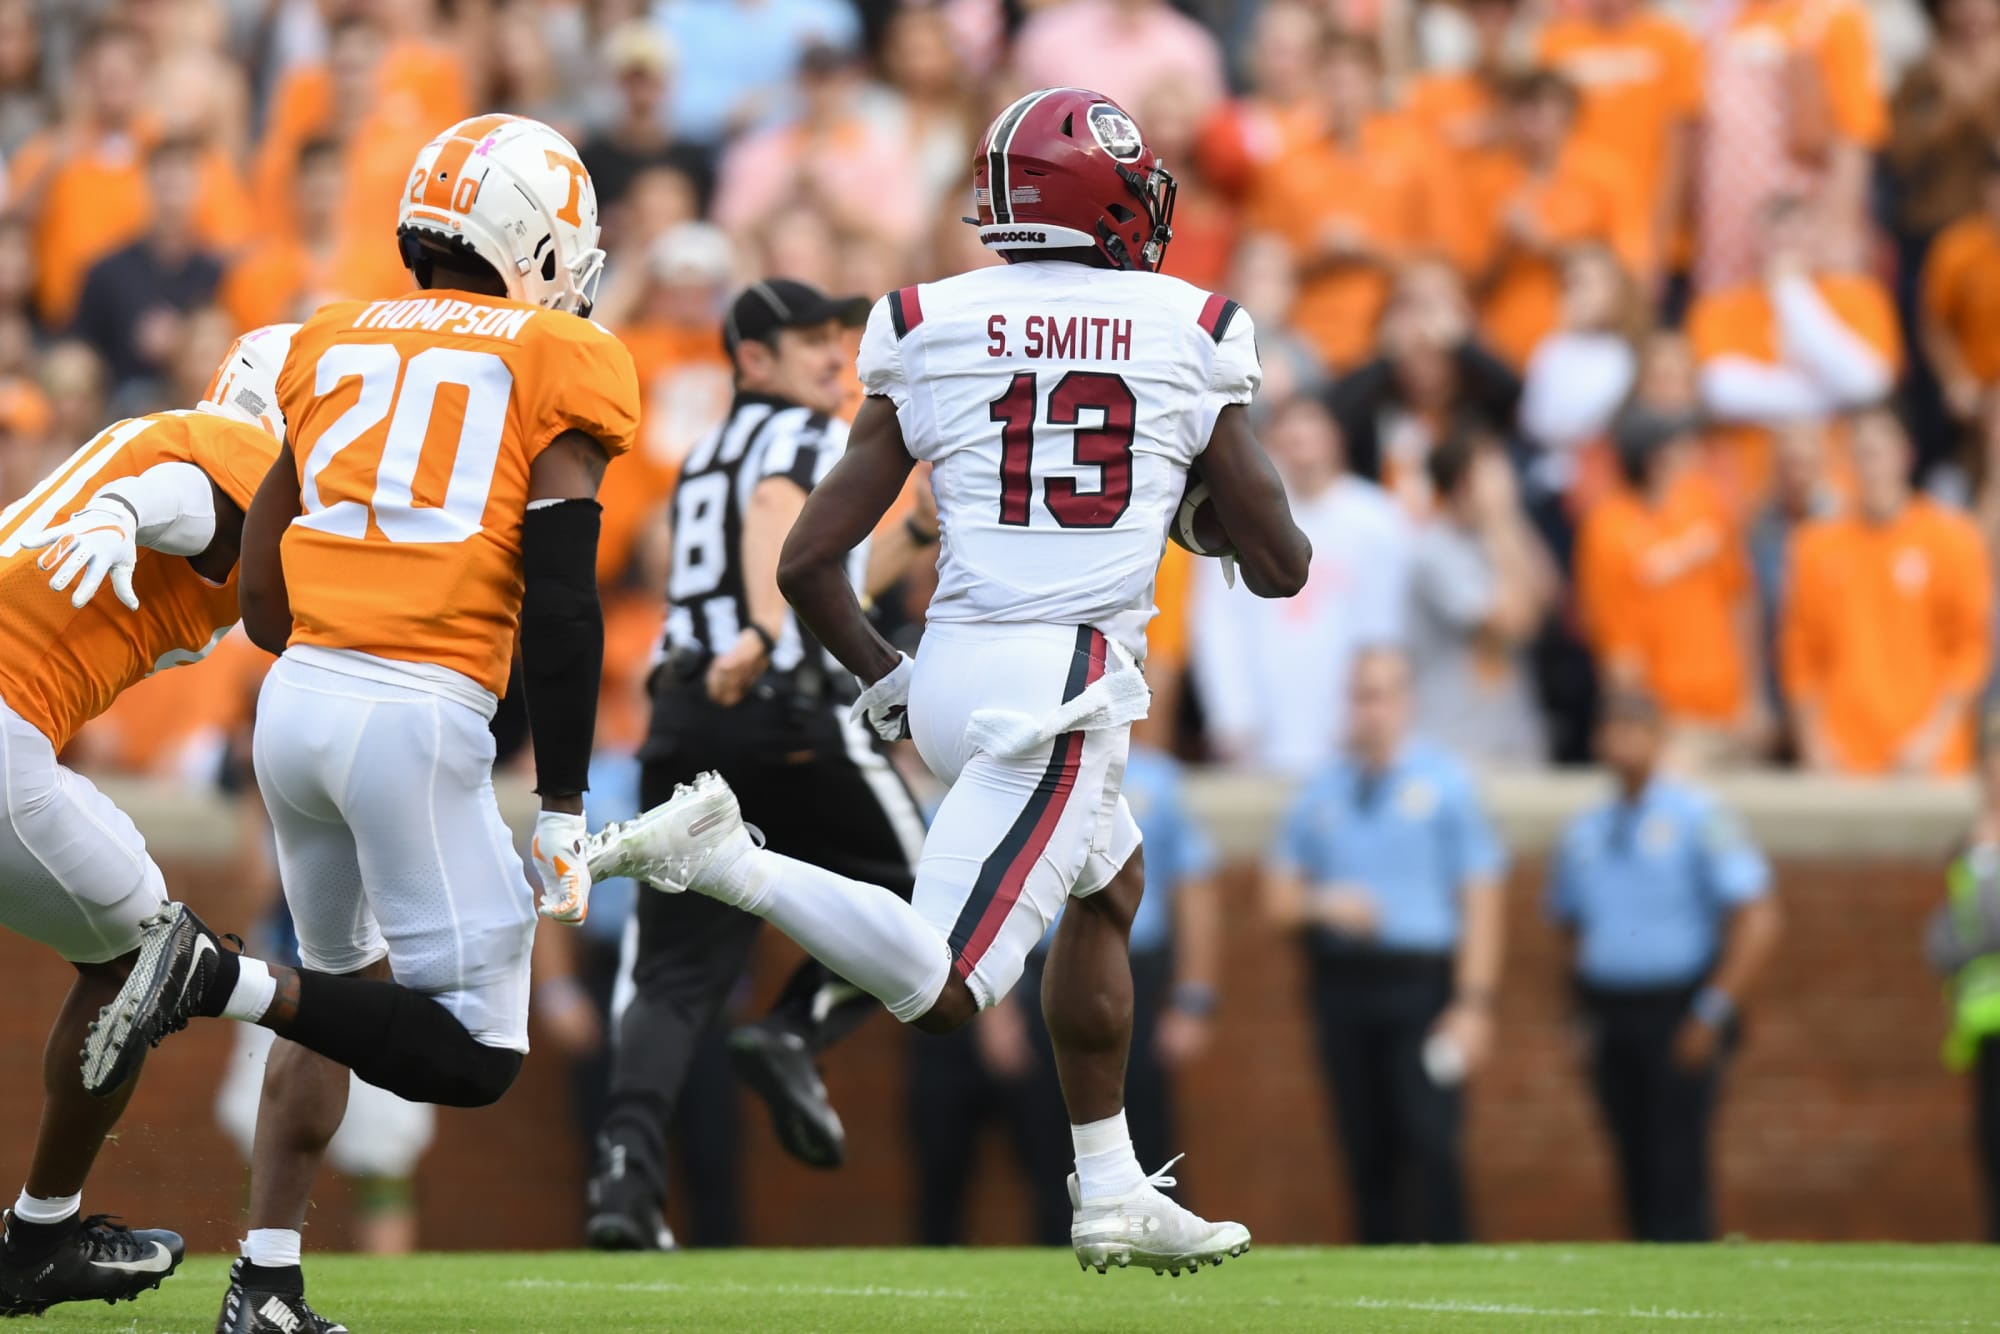 South Carolina vs Tennessee: A Close and Exciting Rivalry in College Football